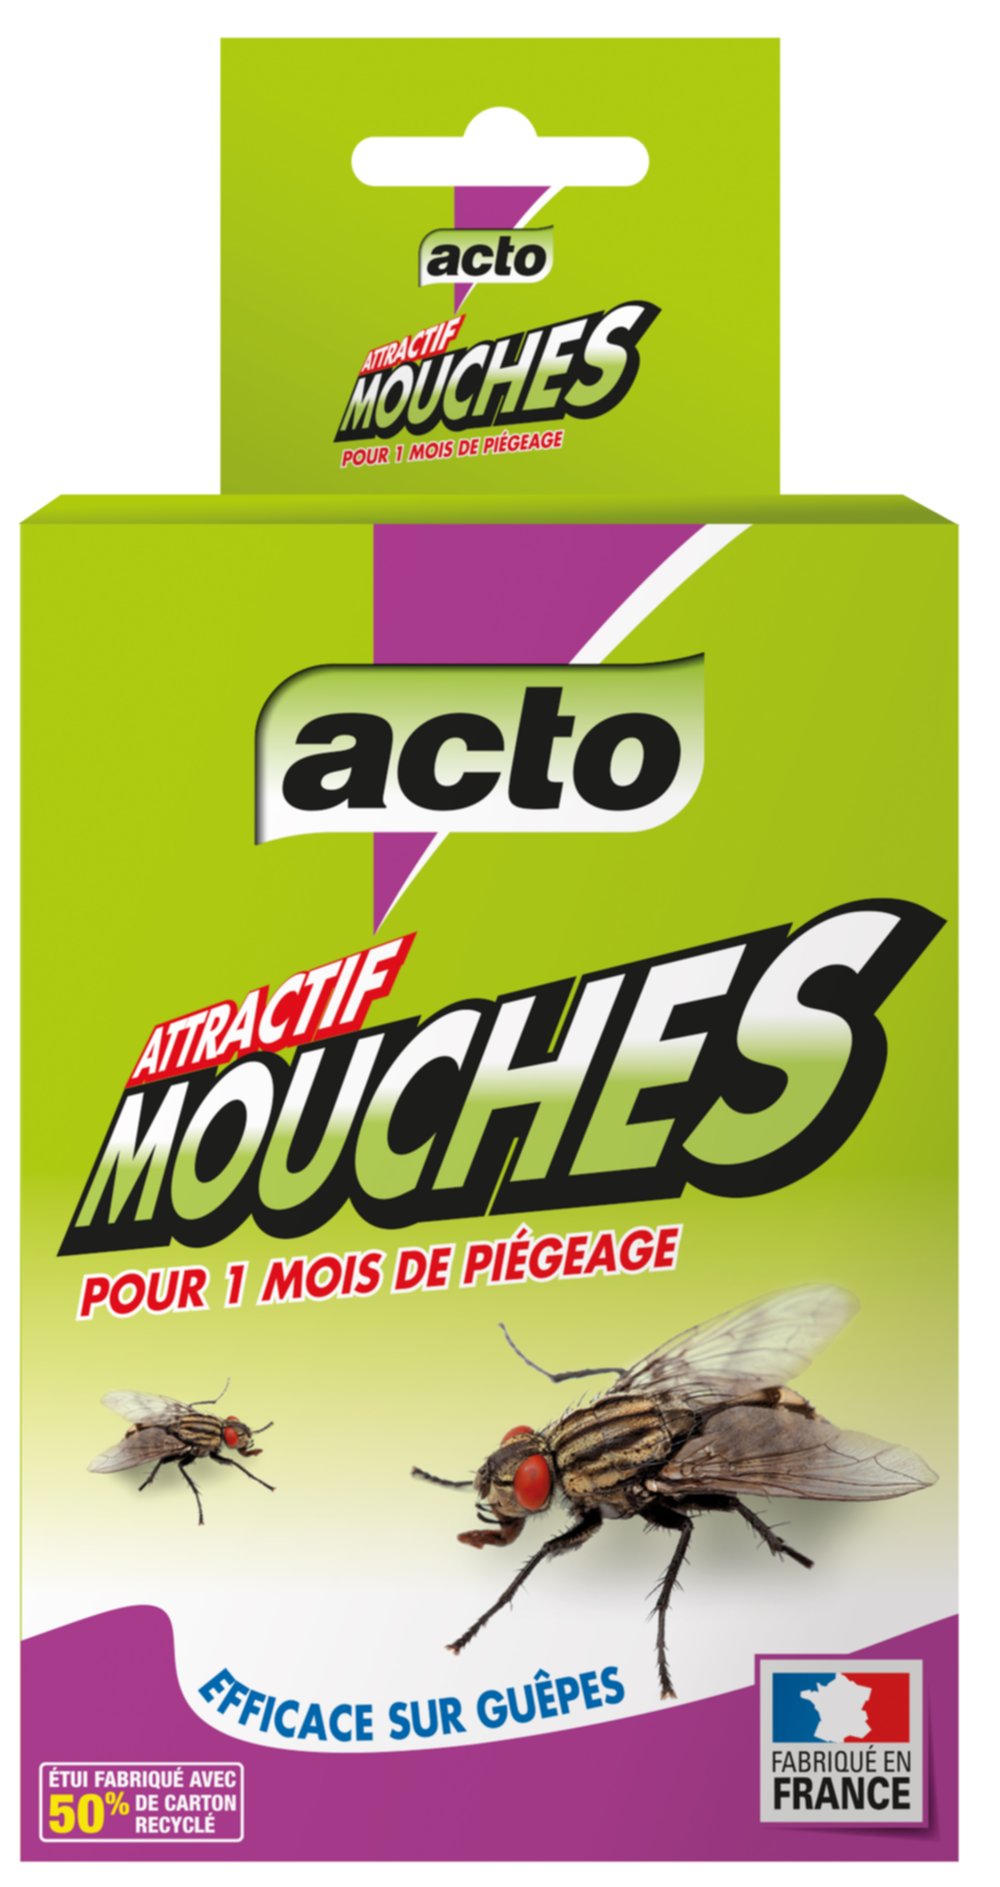 ATTRACTIF MOUCHES